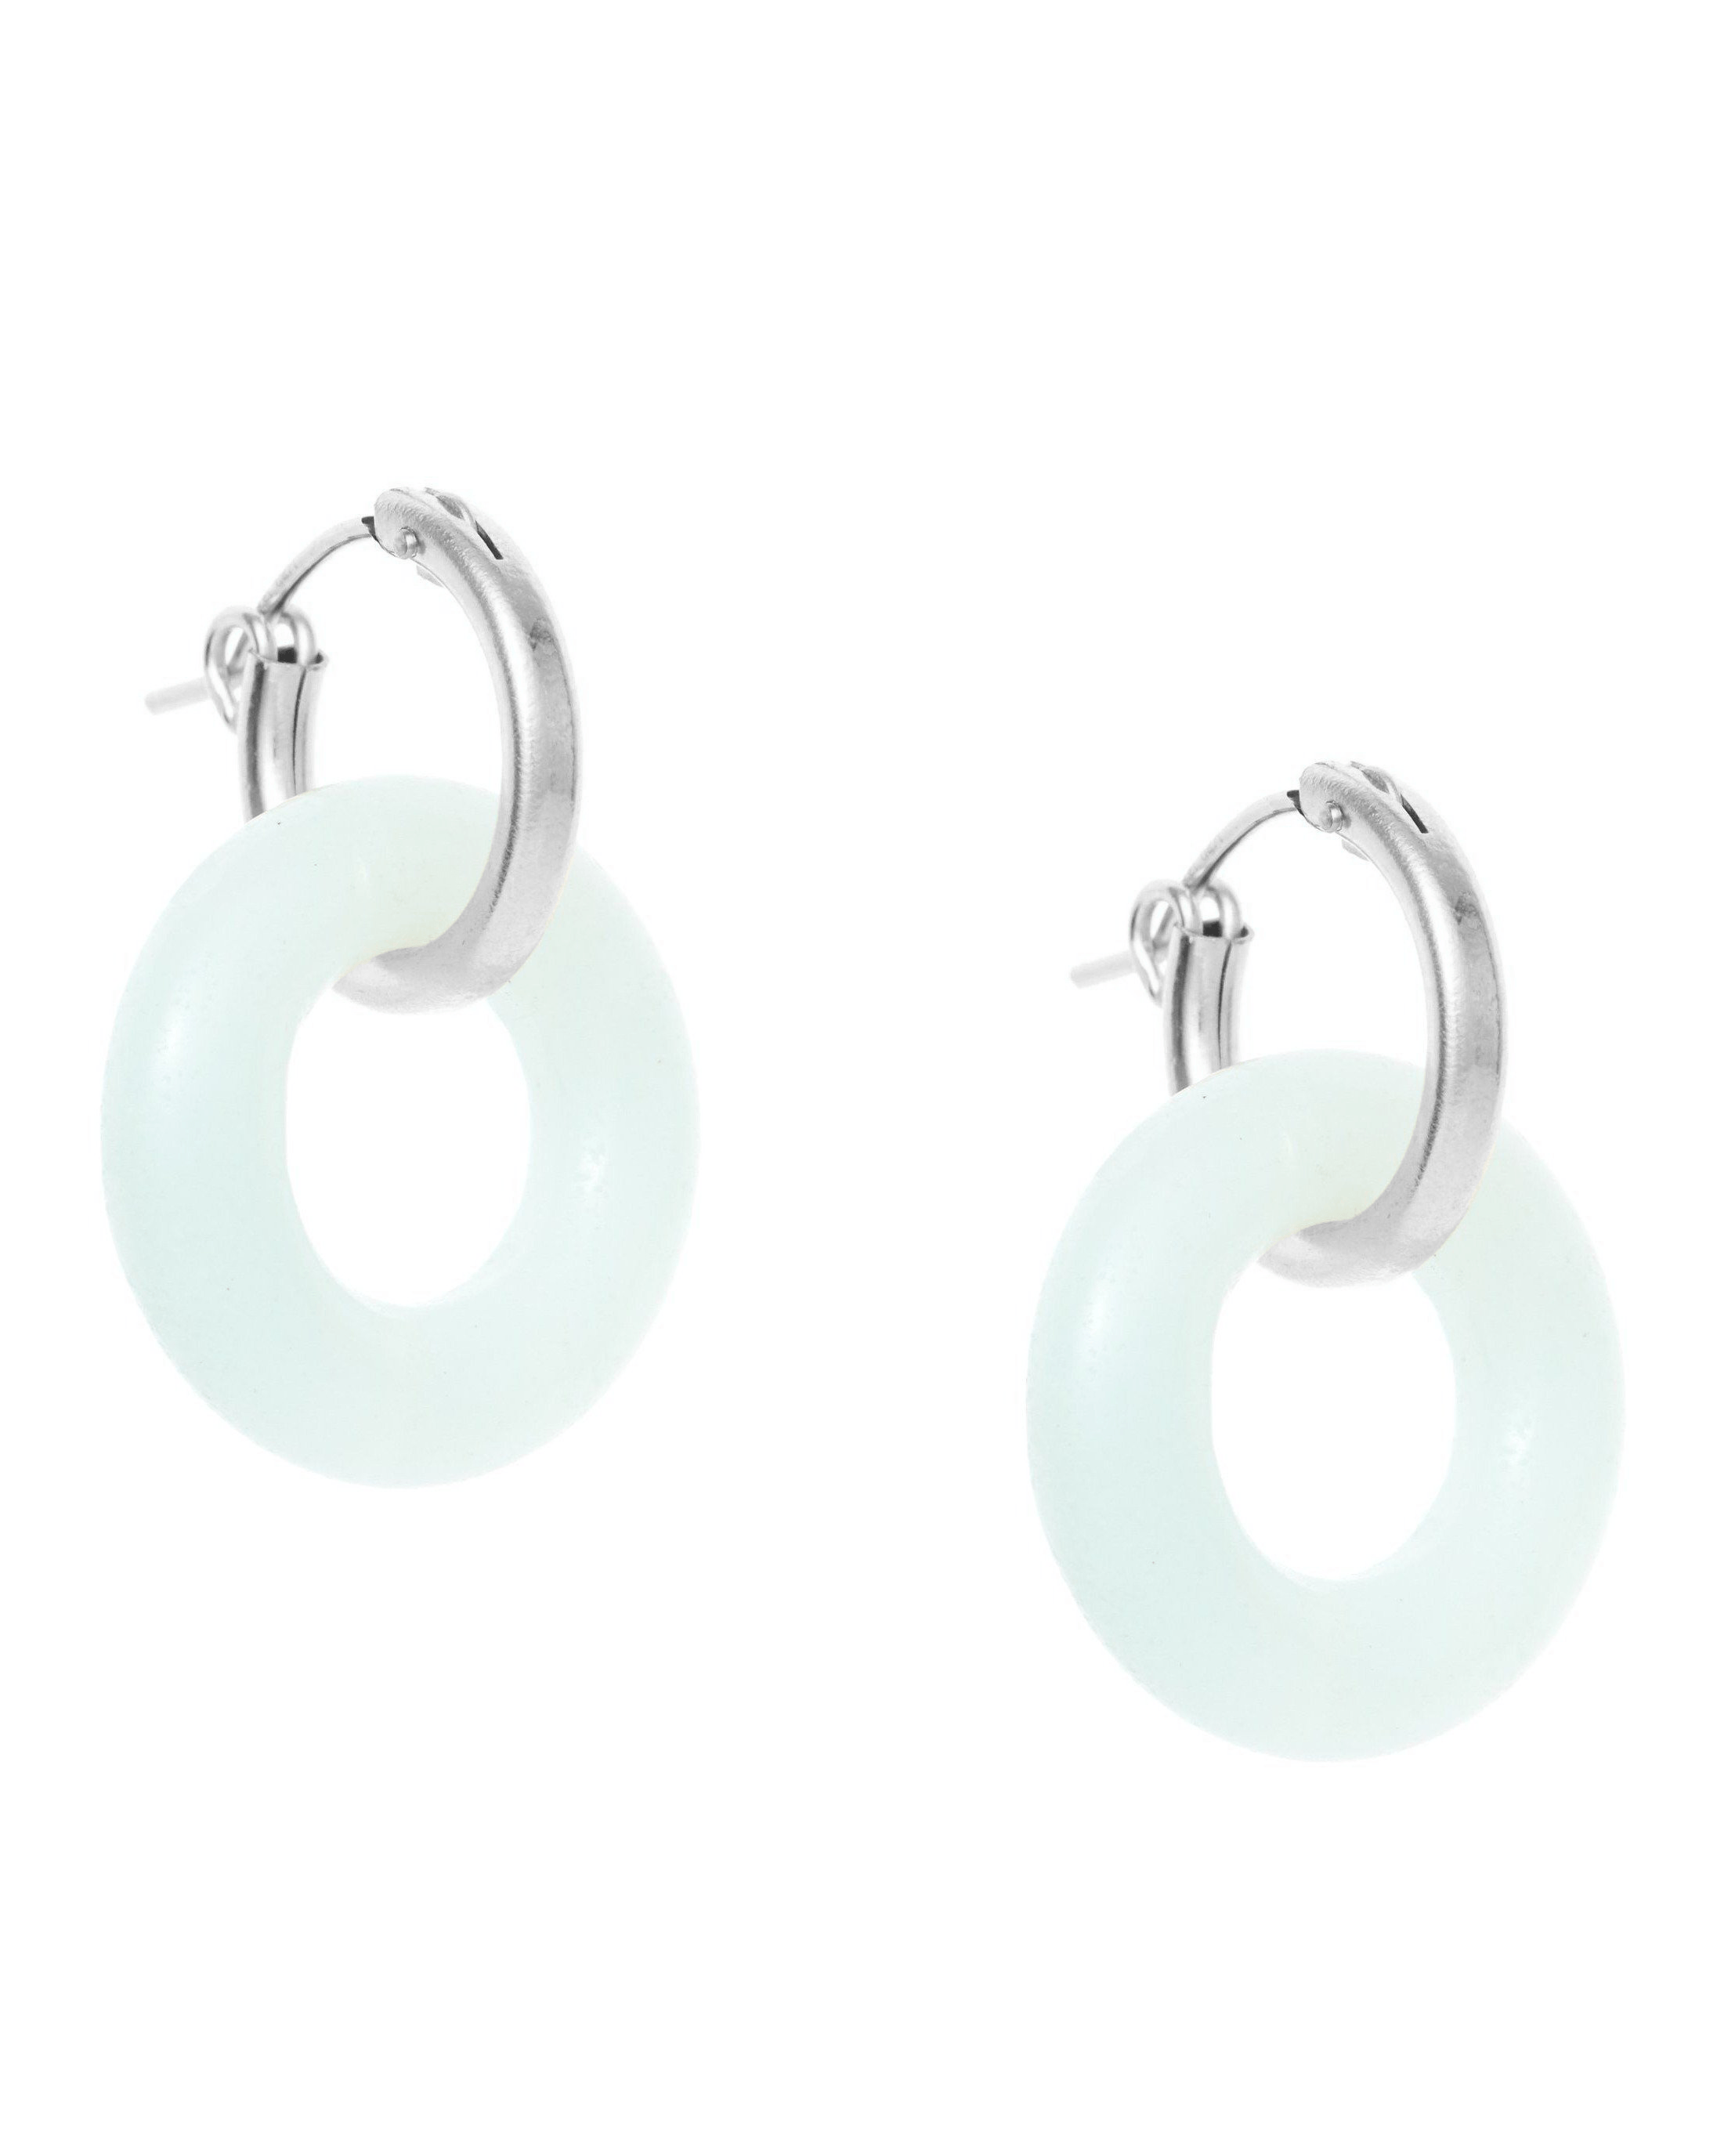 Cerceau Hoops by Kozakh. 15mm hoop earrings with snap closure, crafted in Sterling Silver, featuring a doughnut shape Amazonite gemstone.